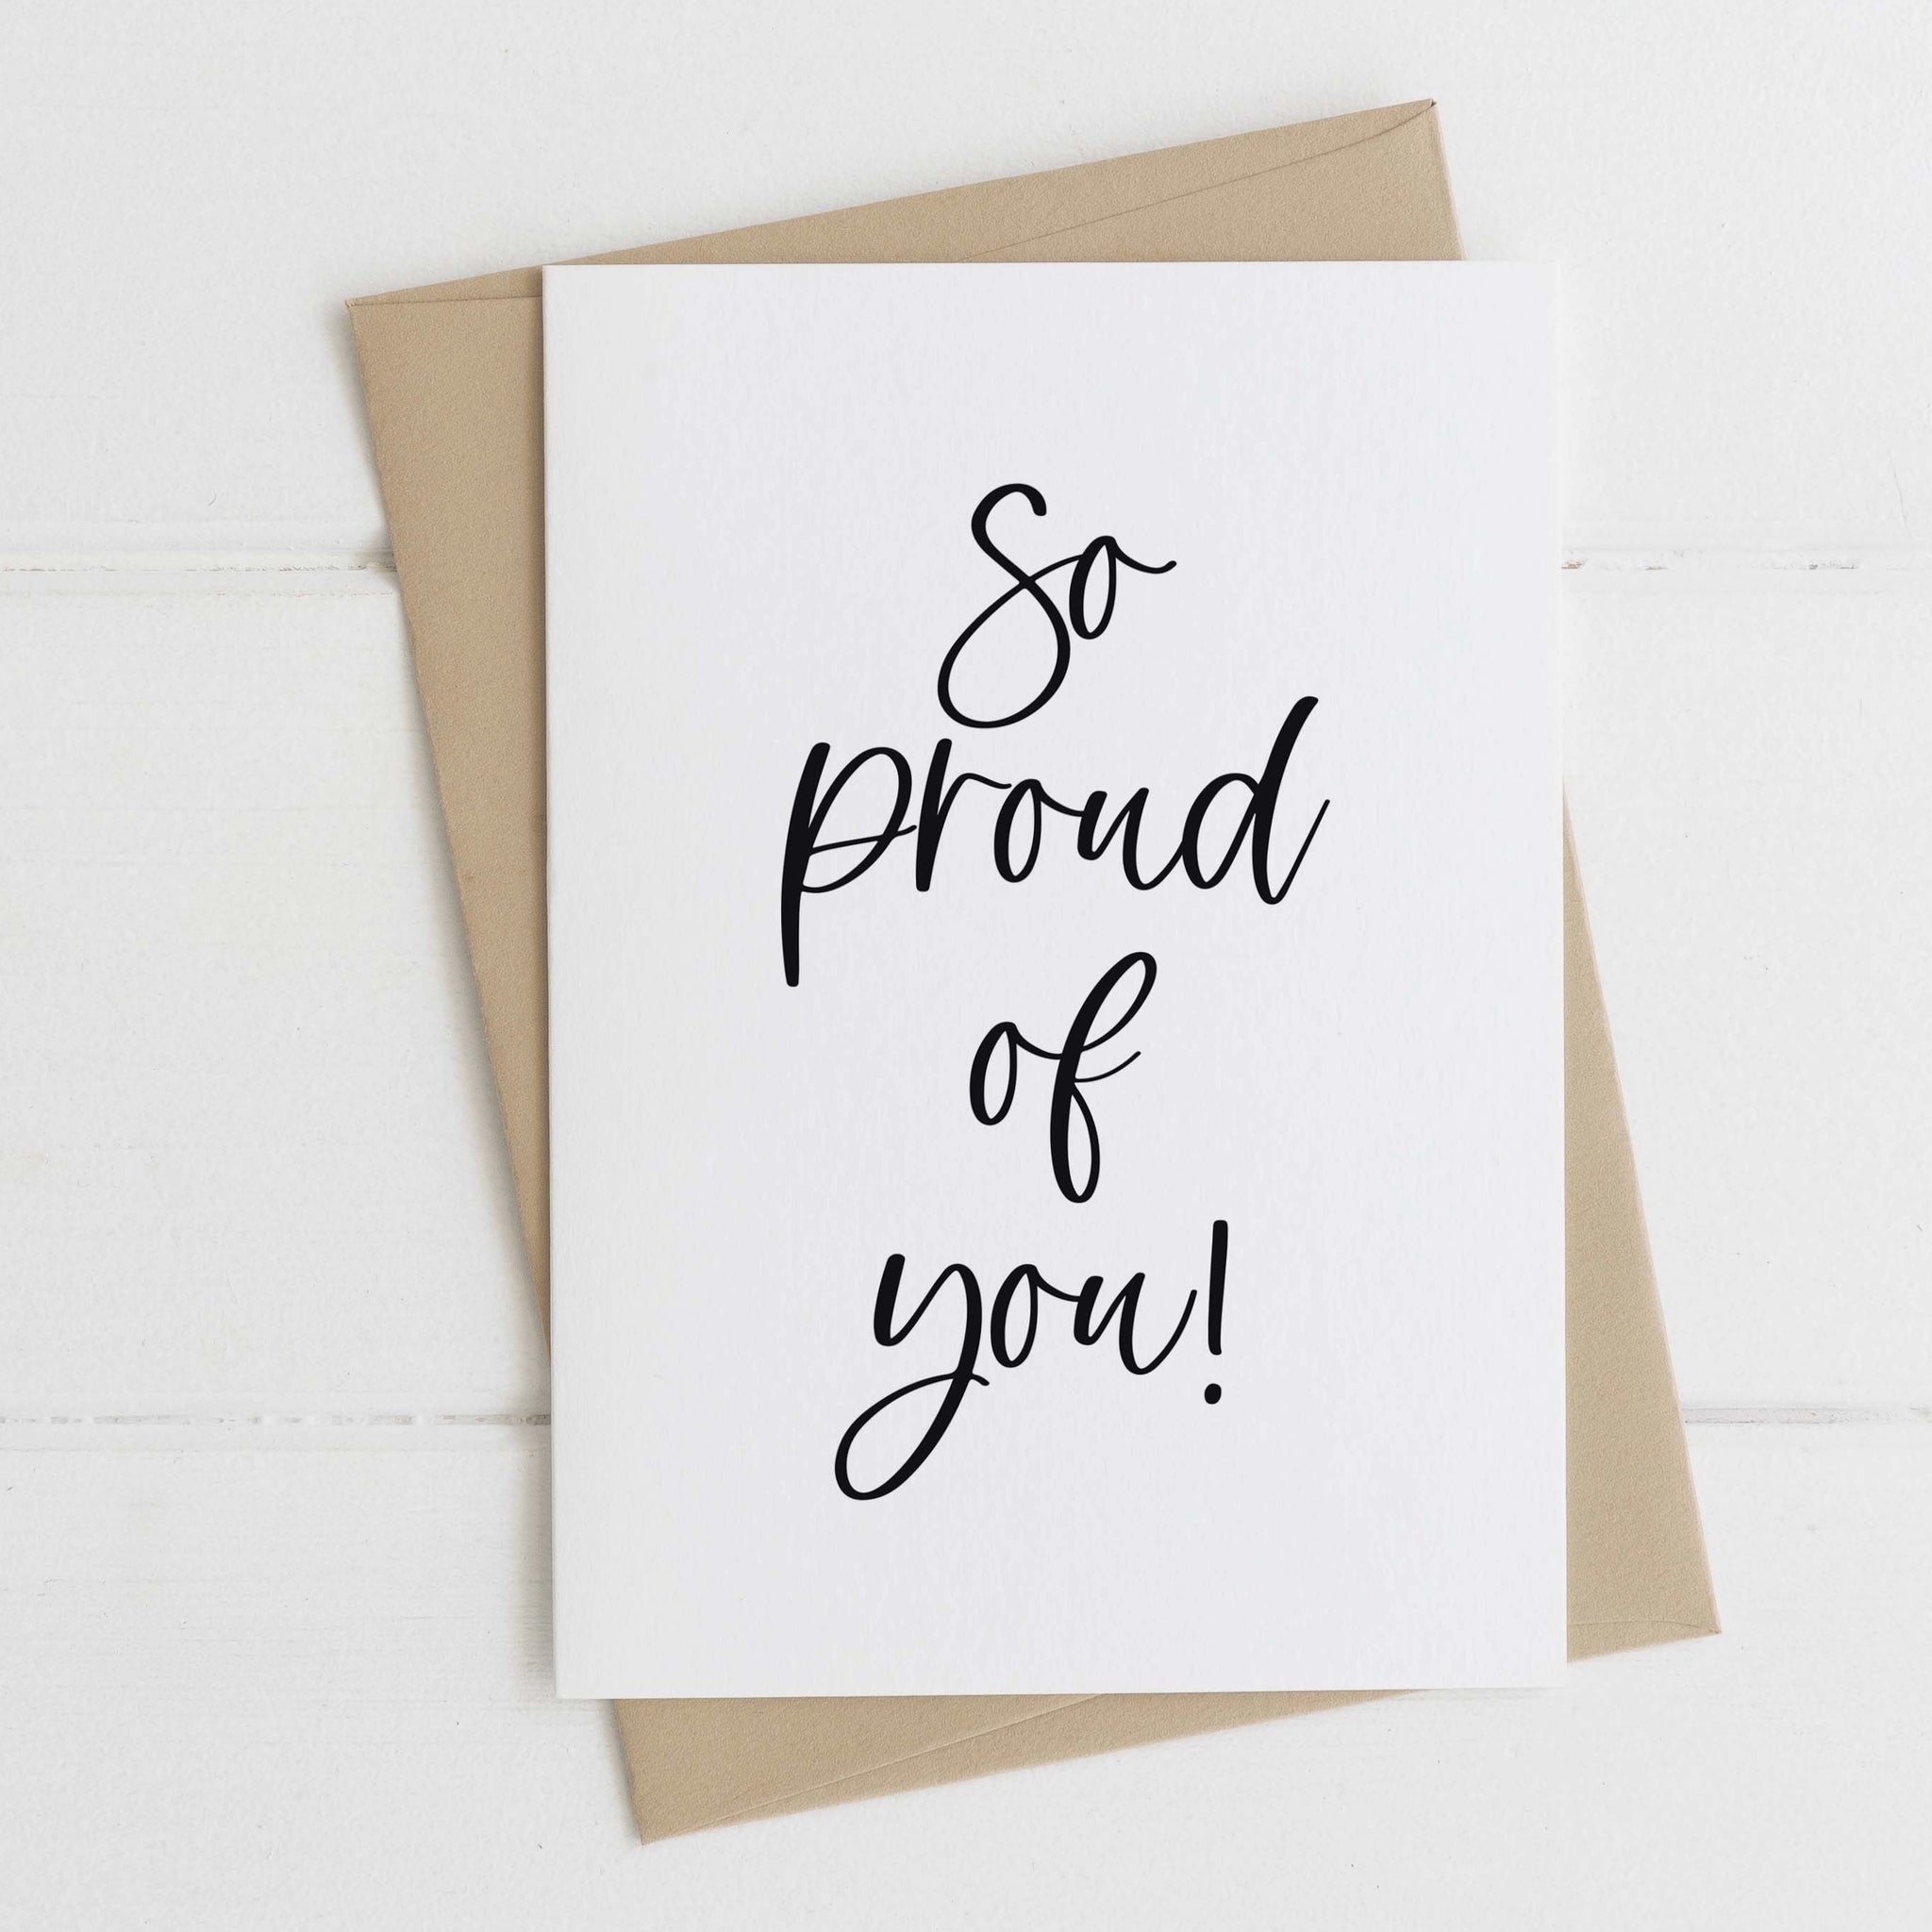 So proud of you card - monochrome